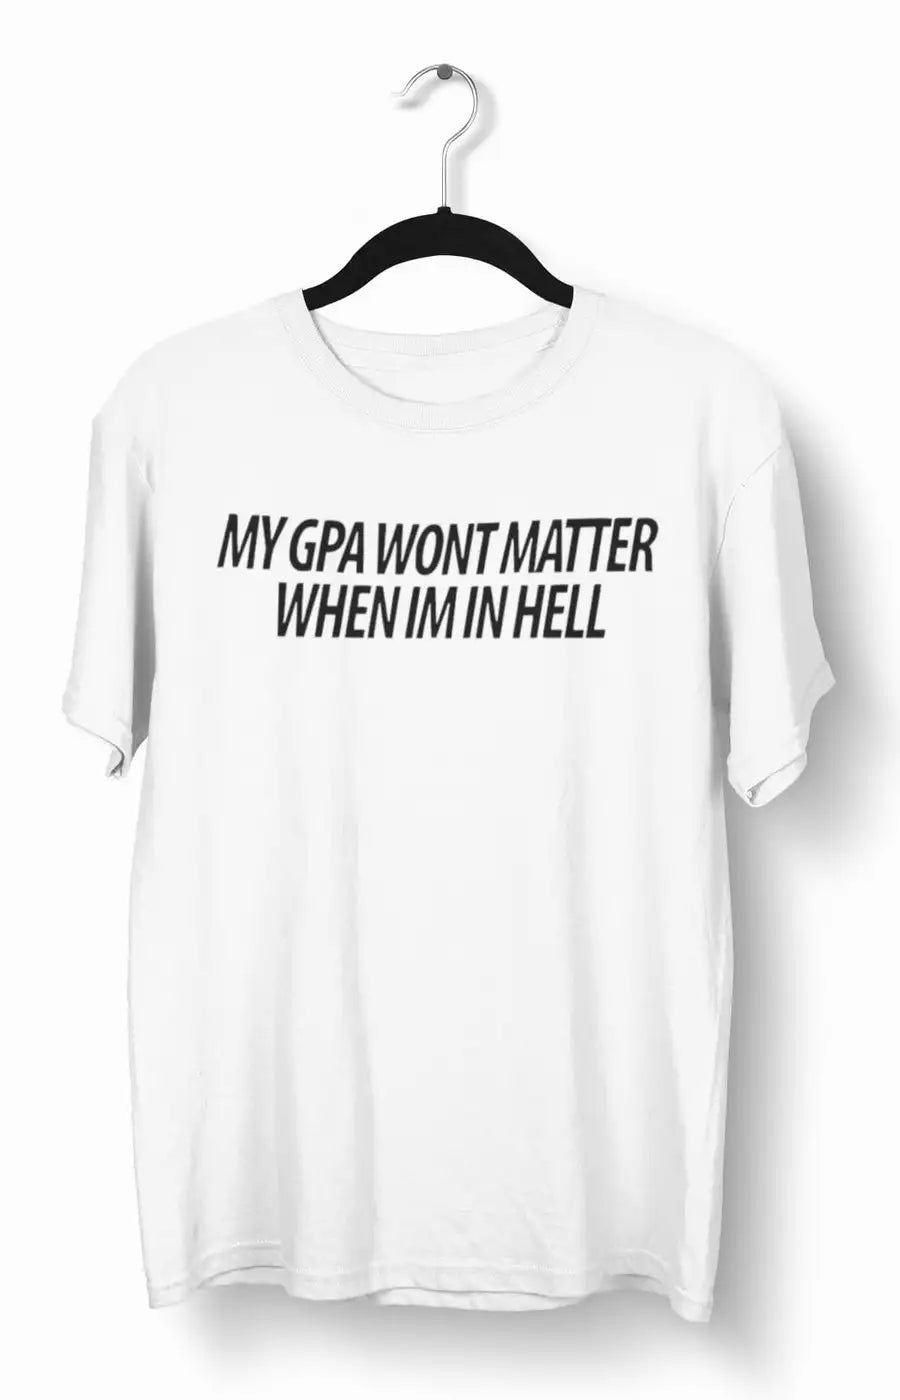 My GPA Wont Matter in Hell T-Shirt Custom T-shirts | Premium Design | Catch My Drift India - Catch My Drift India Clothing clothing, engineer, engineering, made in india, multi colour, shirt,